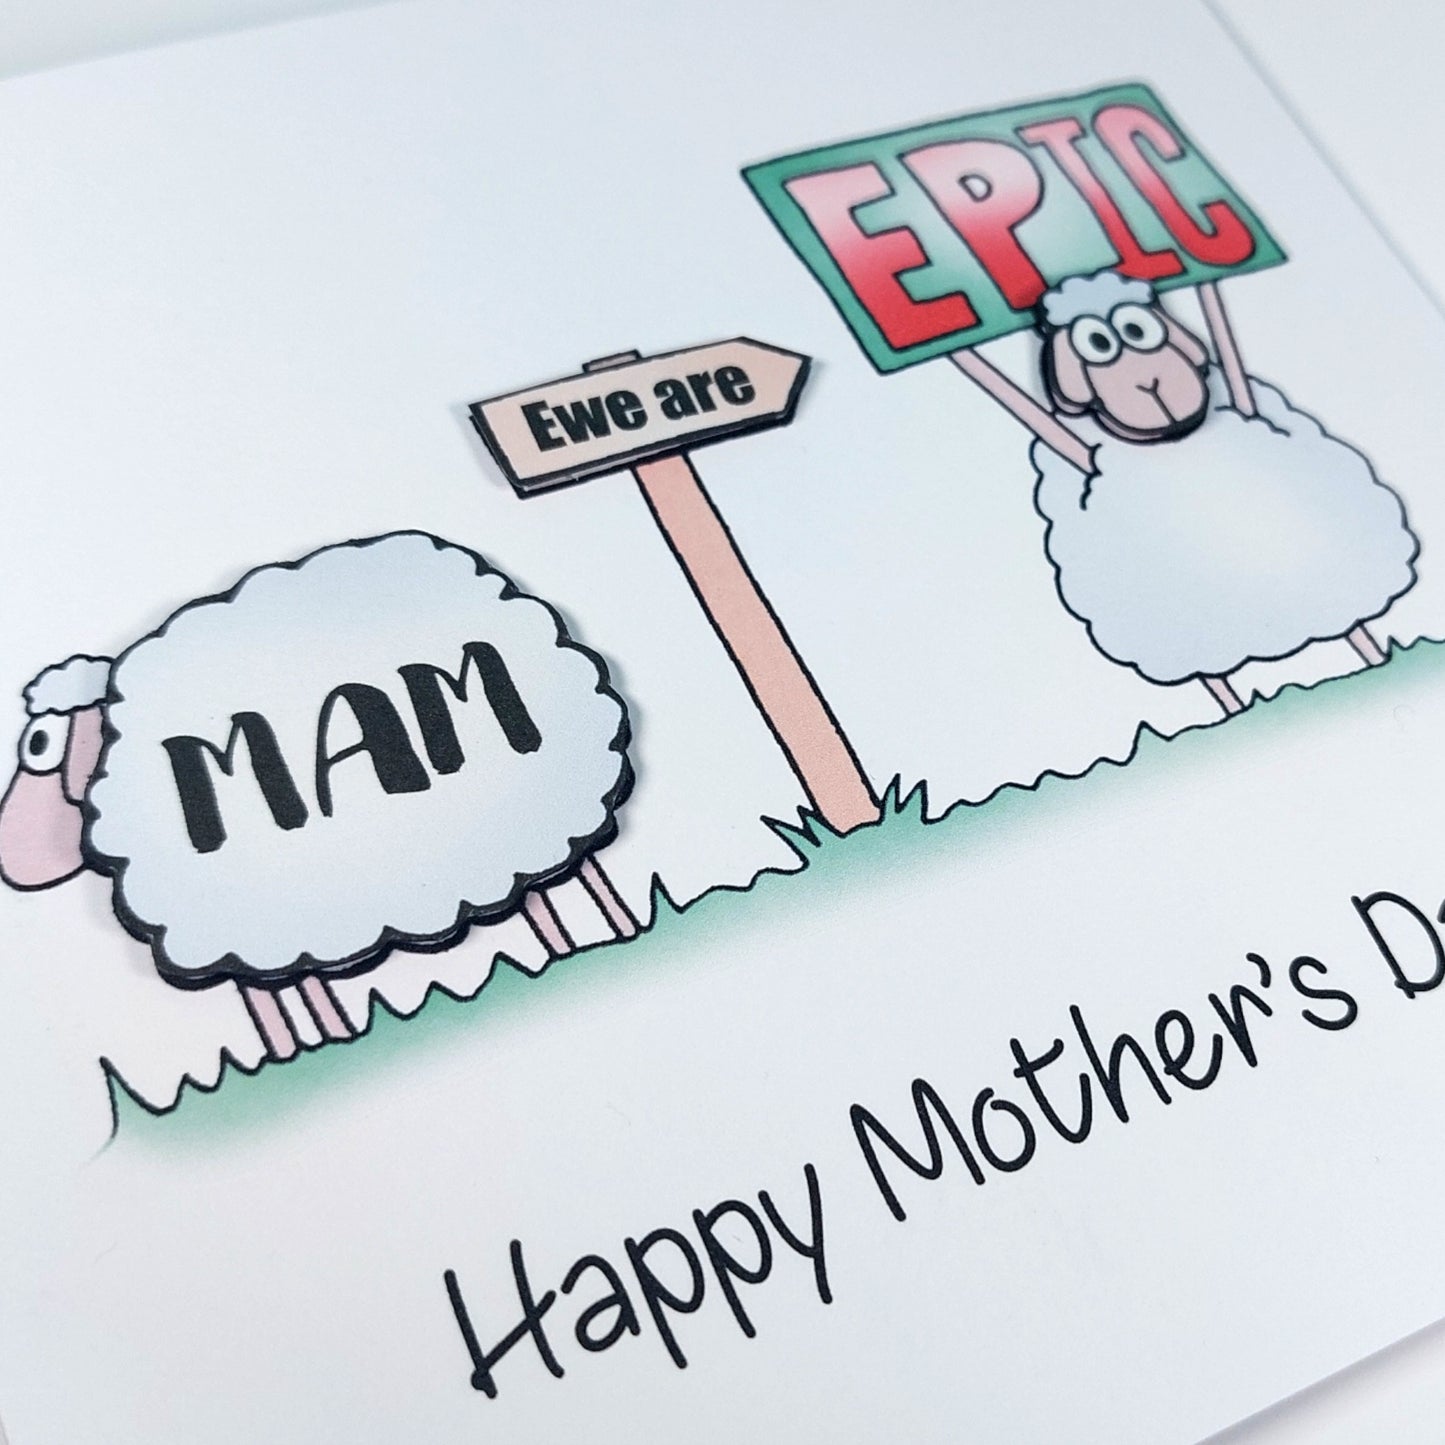 Mam ewe are epic sheep Mothers day card